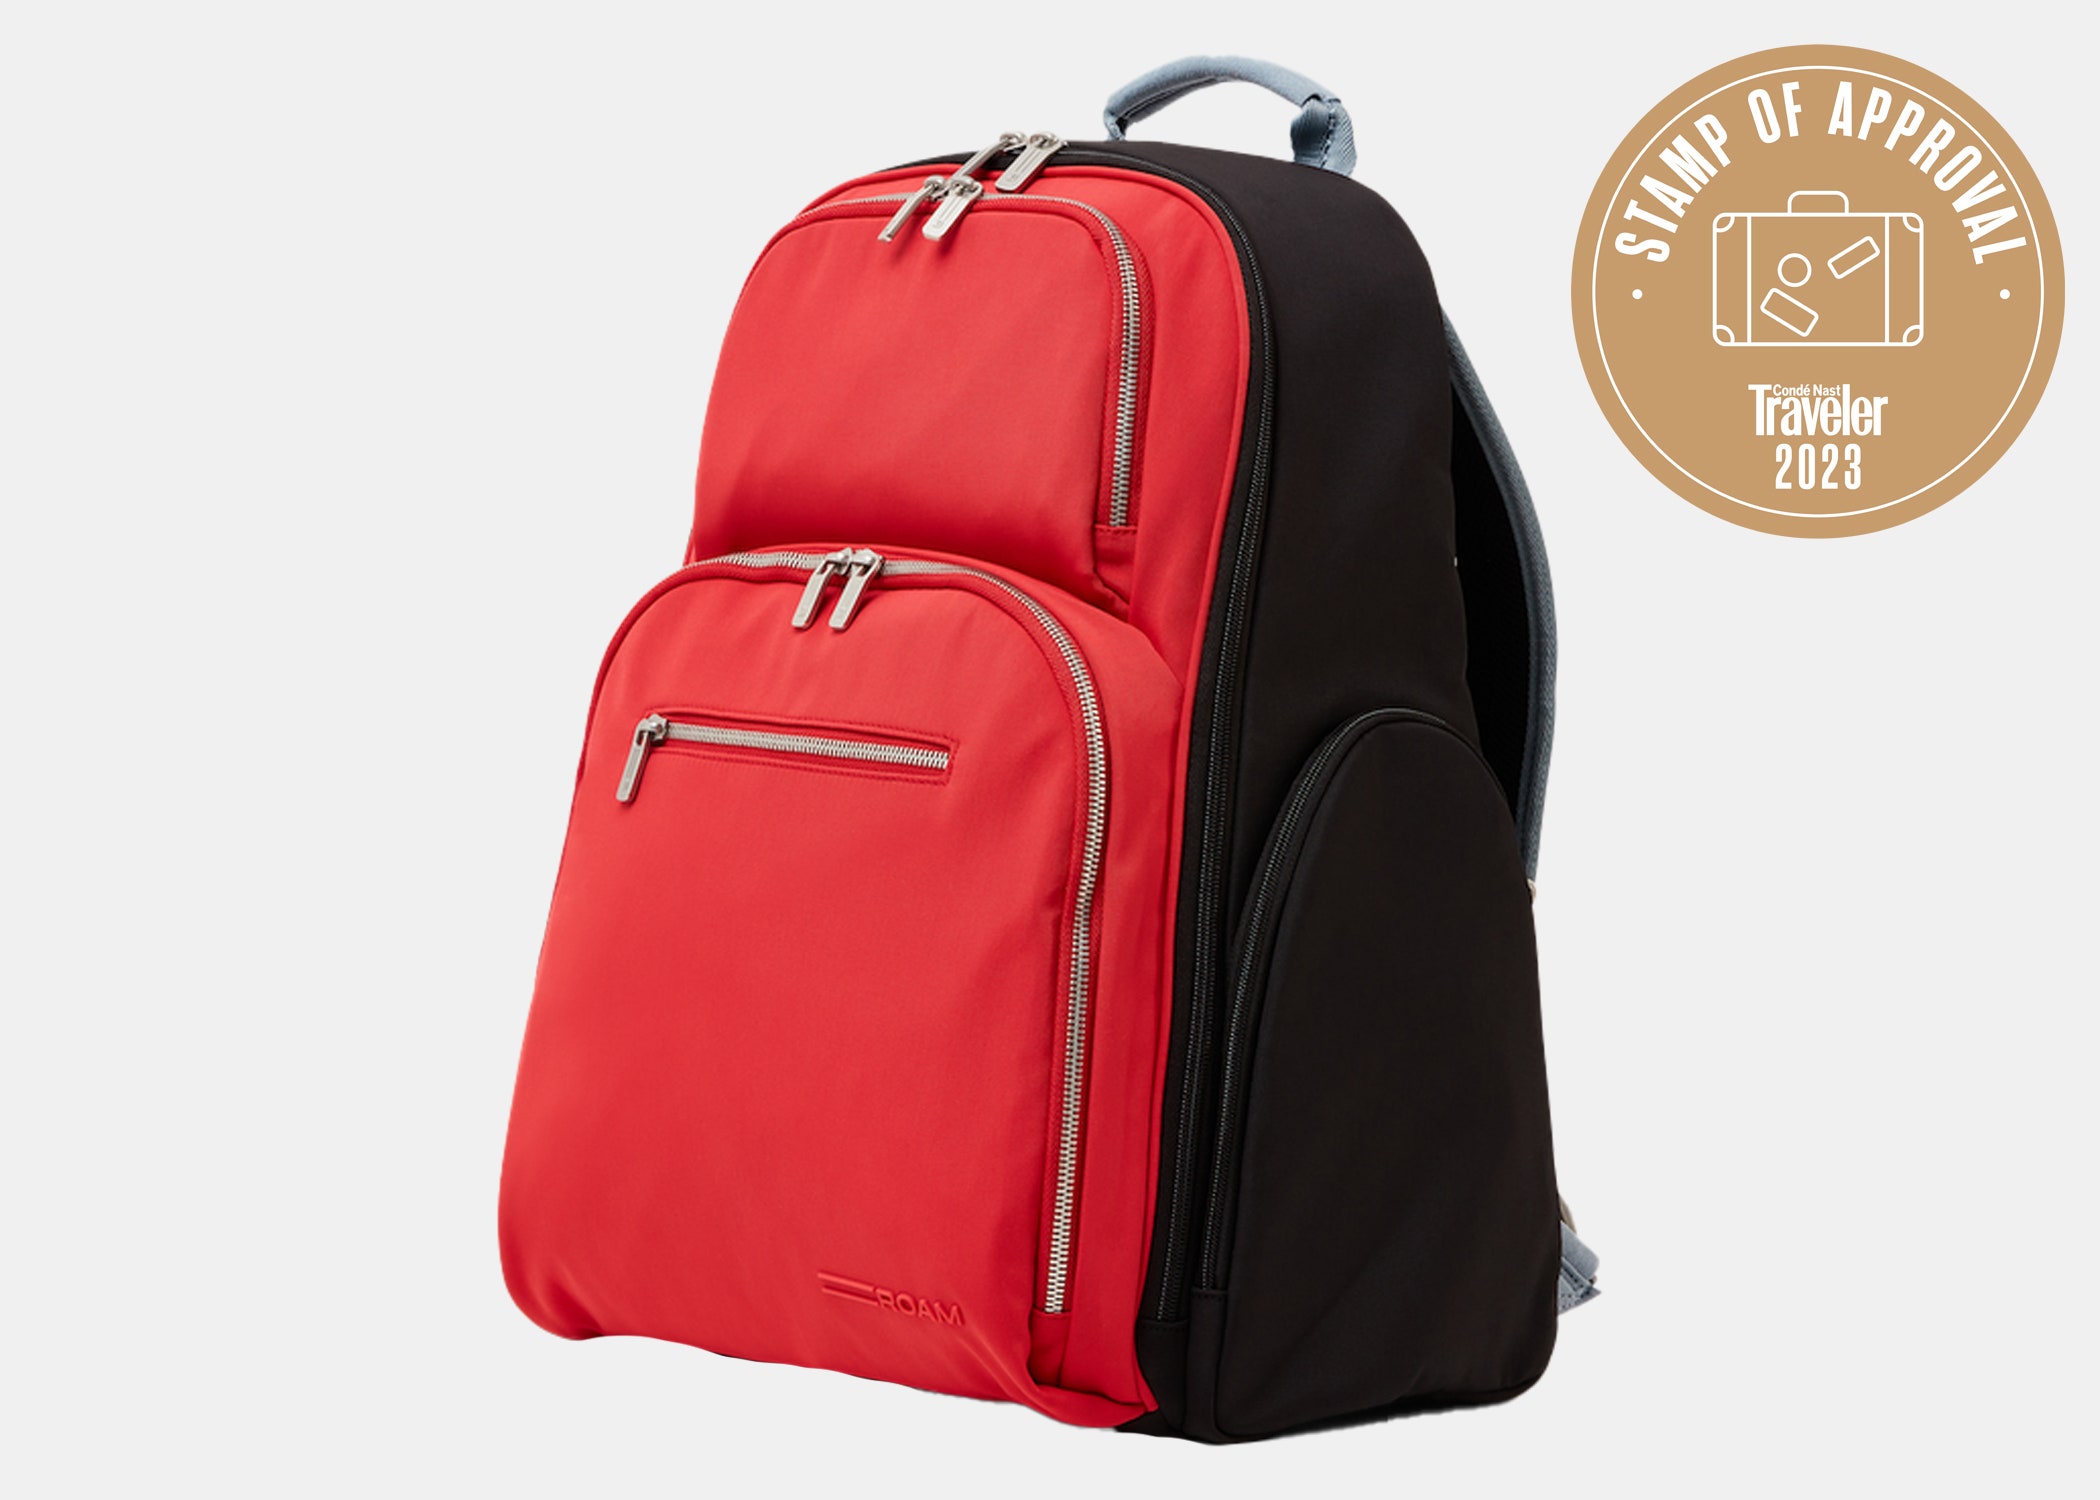 <p>Each time <a href="https://www.cntraveler.com/contributor/madison-flager?mbid=synd_msn_rss&utm_source=msn&utm_medium=syndication">Flager</a> takes this backpack on vacation she's complimented on its aesthetic. The bag is fully customizable, so each customer can choose the colors used for the front, back, sides, and straps. The wide, deep side pockets are a highlight for Flager, who says “there’s a place for everything—I like to put my important documents, ID, phone, and AirPods in the top zippered pocket for easy access, my Kindle or a book in the largest exterior pocket, and my keys in the smallest exterior pocket. I like that there are two side pockets for a water bottle and an umbrella or other small item."</p> <p><strong>Pros:</strong> Lightweight, many color options<br> <strong>Cons:</strong> A water bottle sometimes slips out of the pocket</p> $350, Roam. <a href="https://roamluggage.com/products/continental-backpack">Get it now!</a><p>Sign up to receive the latest news, expert tips, and inspiration on all things travel</p><a href="https://www.cntraveler.com/newsletter/the-daily?sourceCode=msnsend">Inspire Me</a>